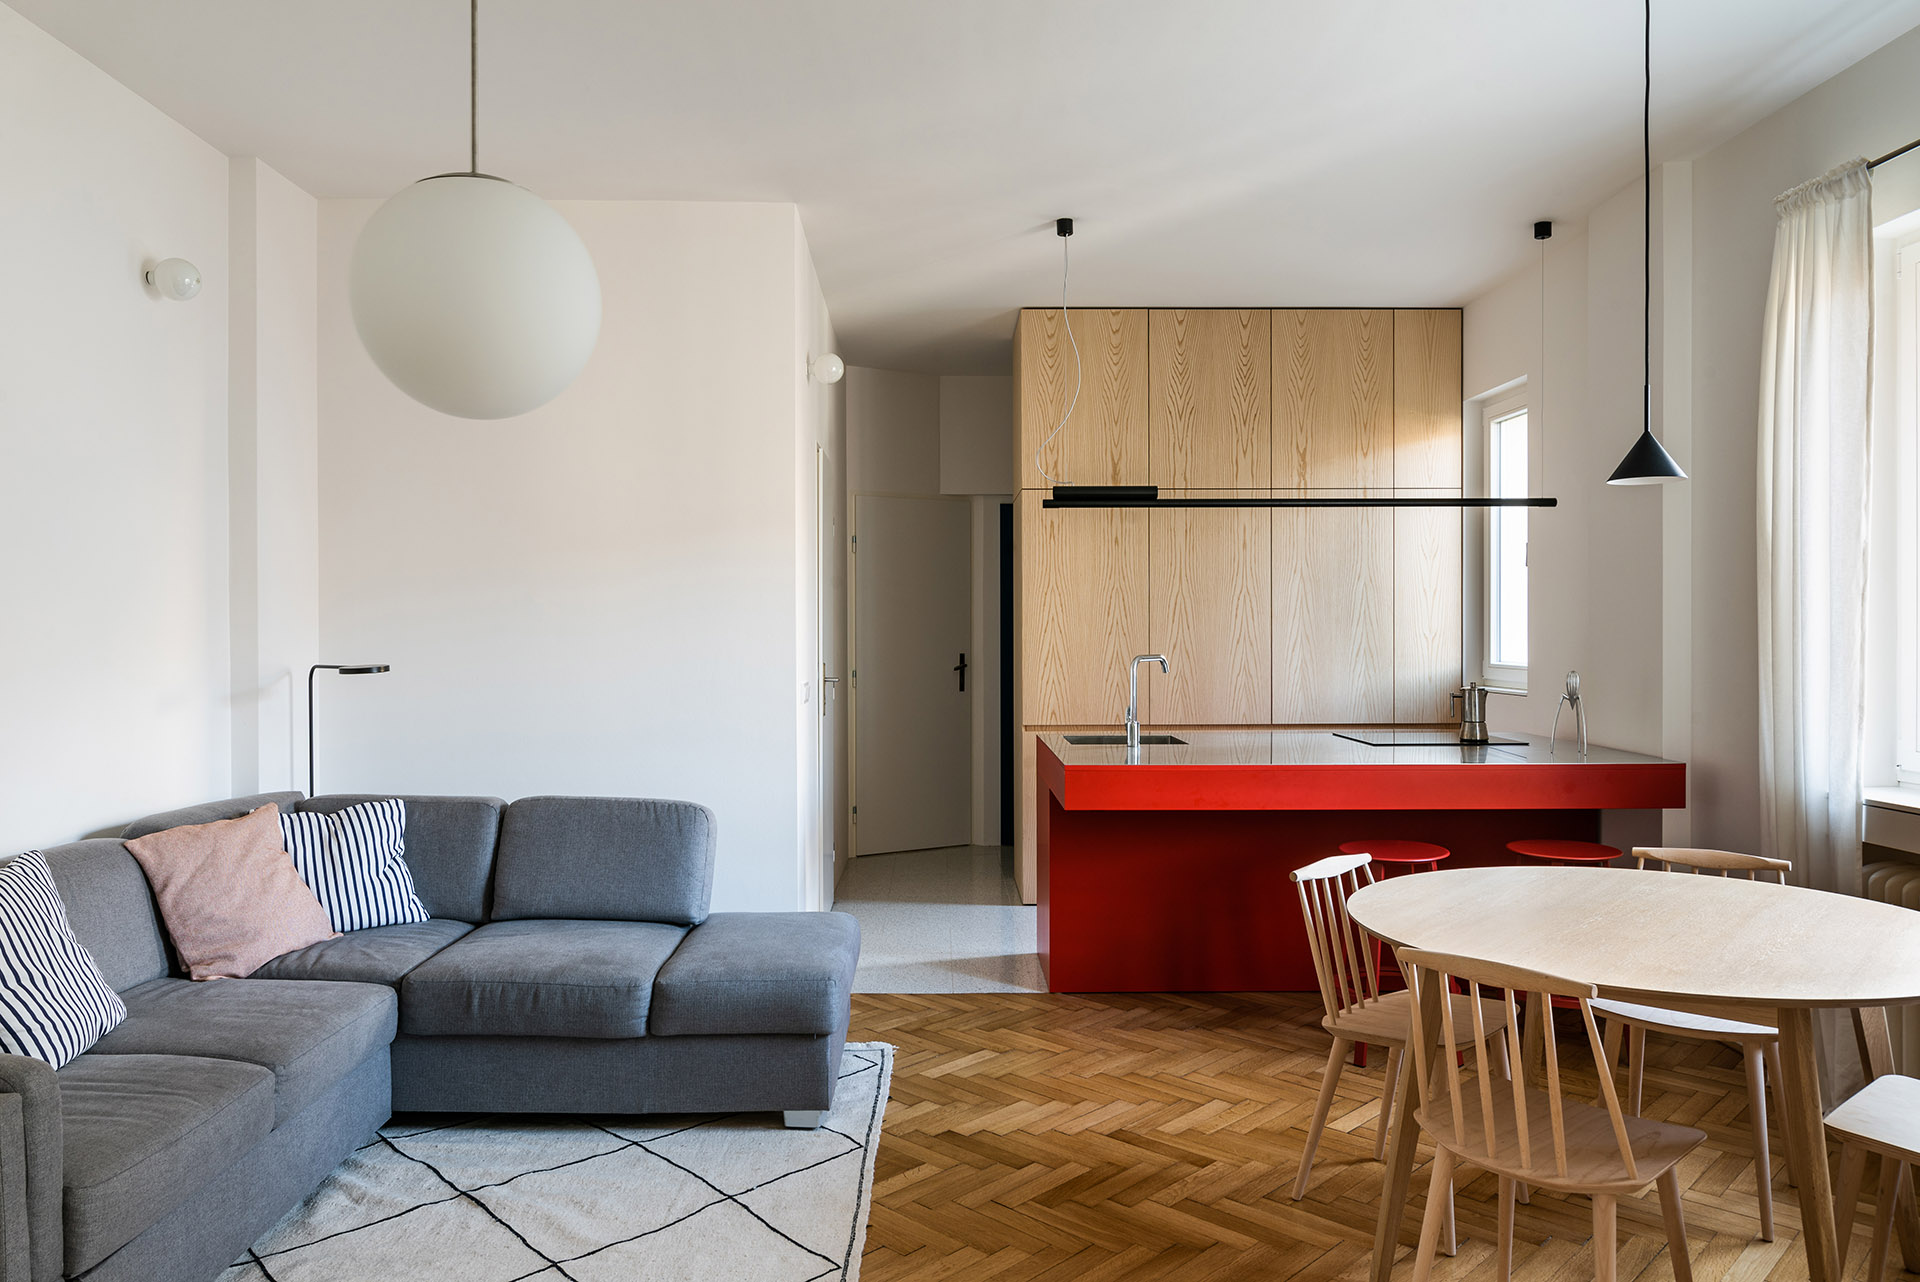 The renovation of the Apartment H in Bratislava's Old Town. A rational layout and a contrast between the white and the primary colors